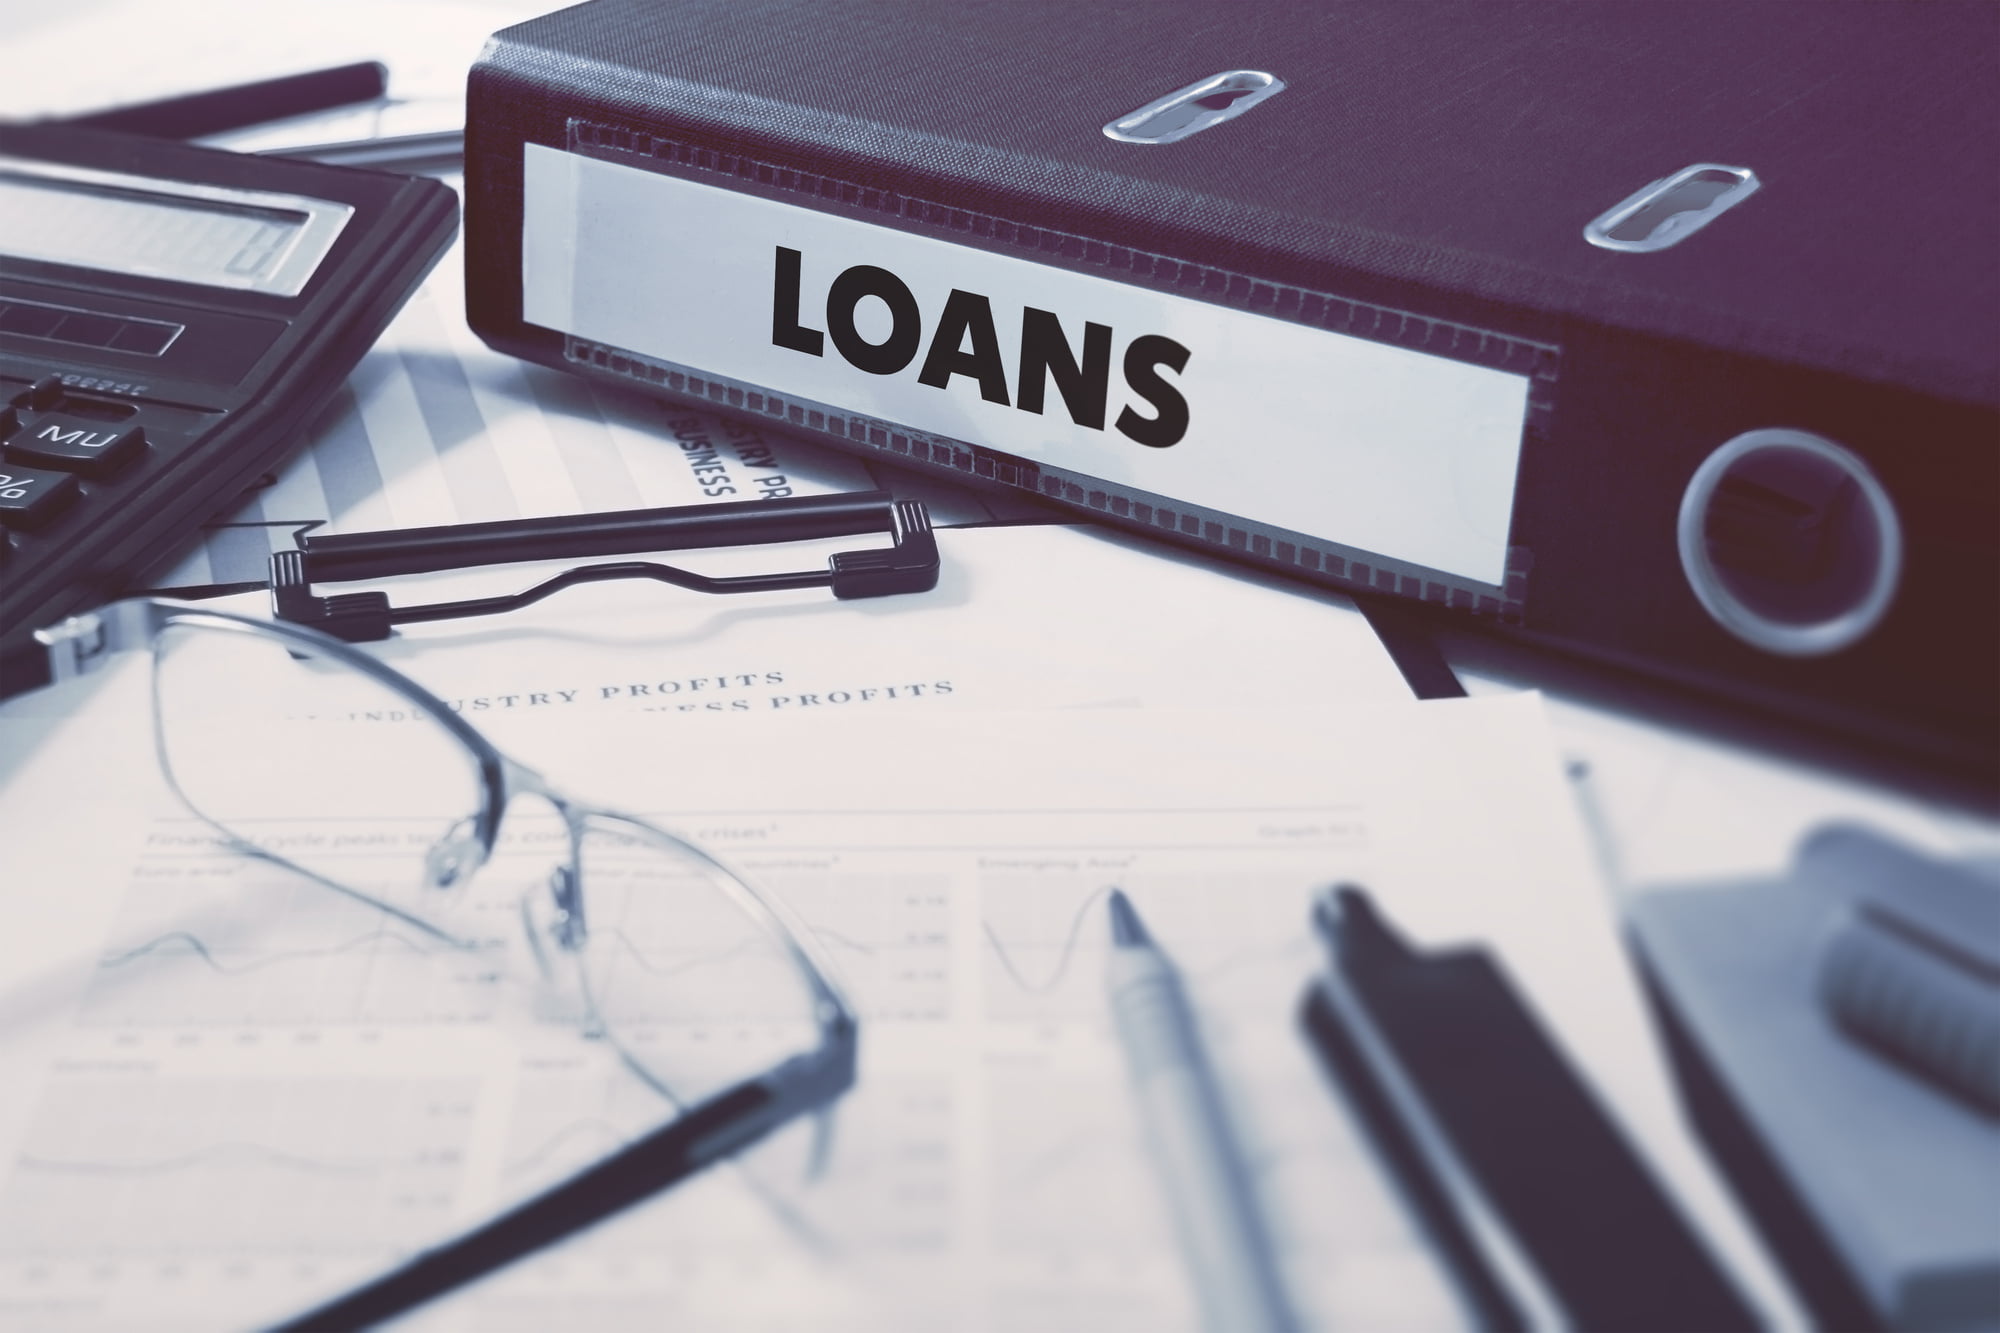 If you are applying for a loan, then you need to know more about fixed vs. variable-rate loans. This is the difference between the two options.